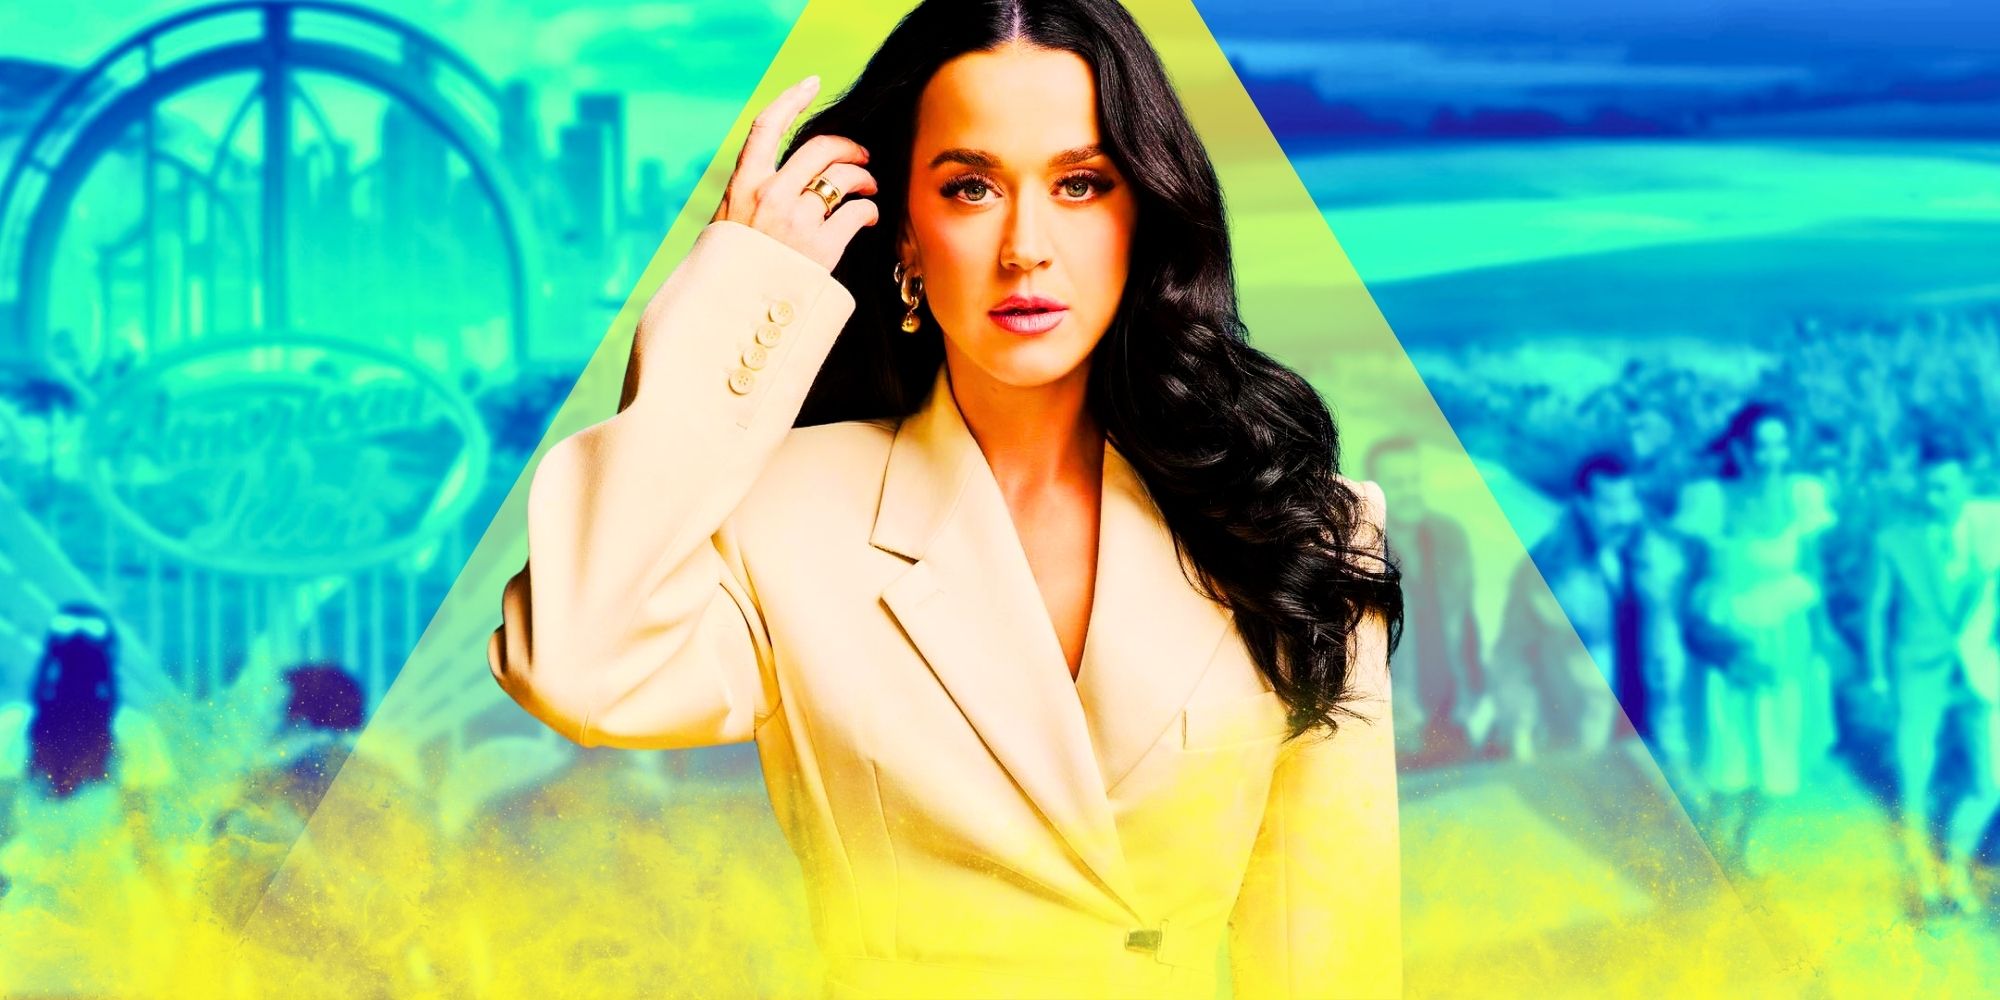 American Idol's Katy Perry With A Montage In The Background